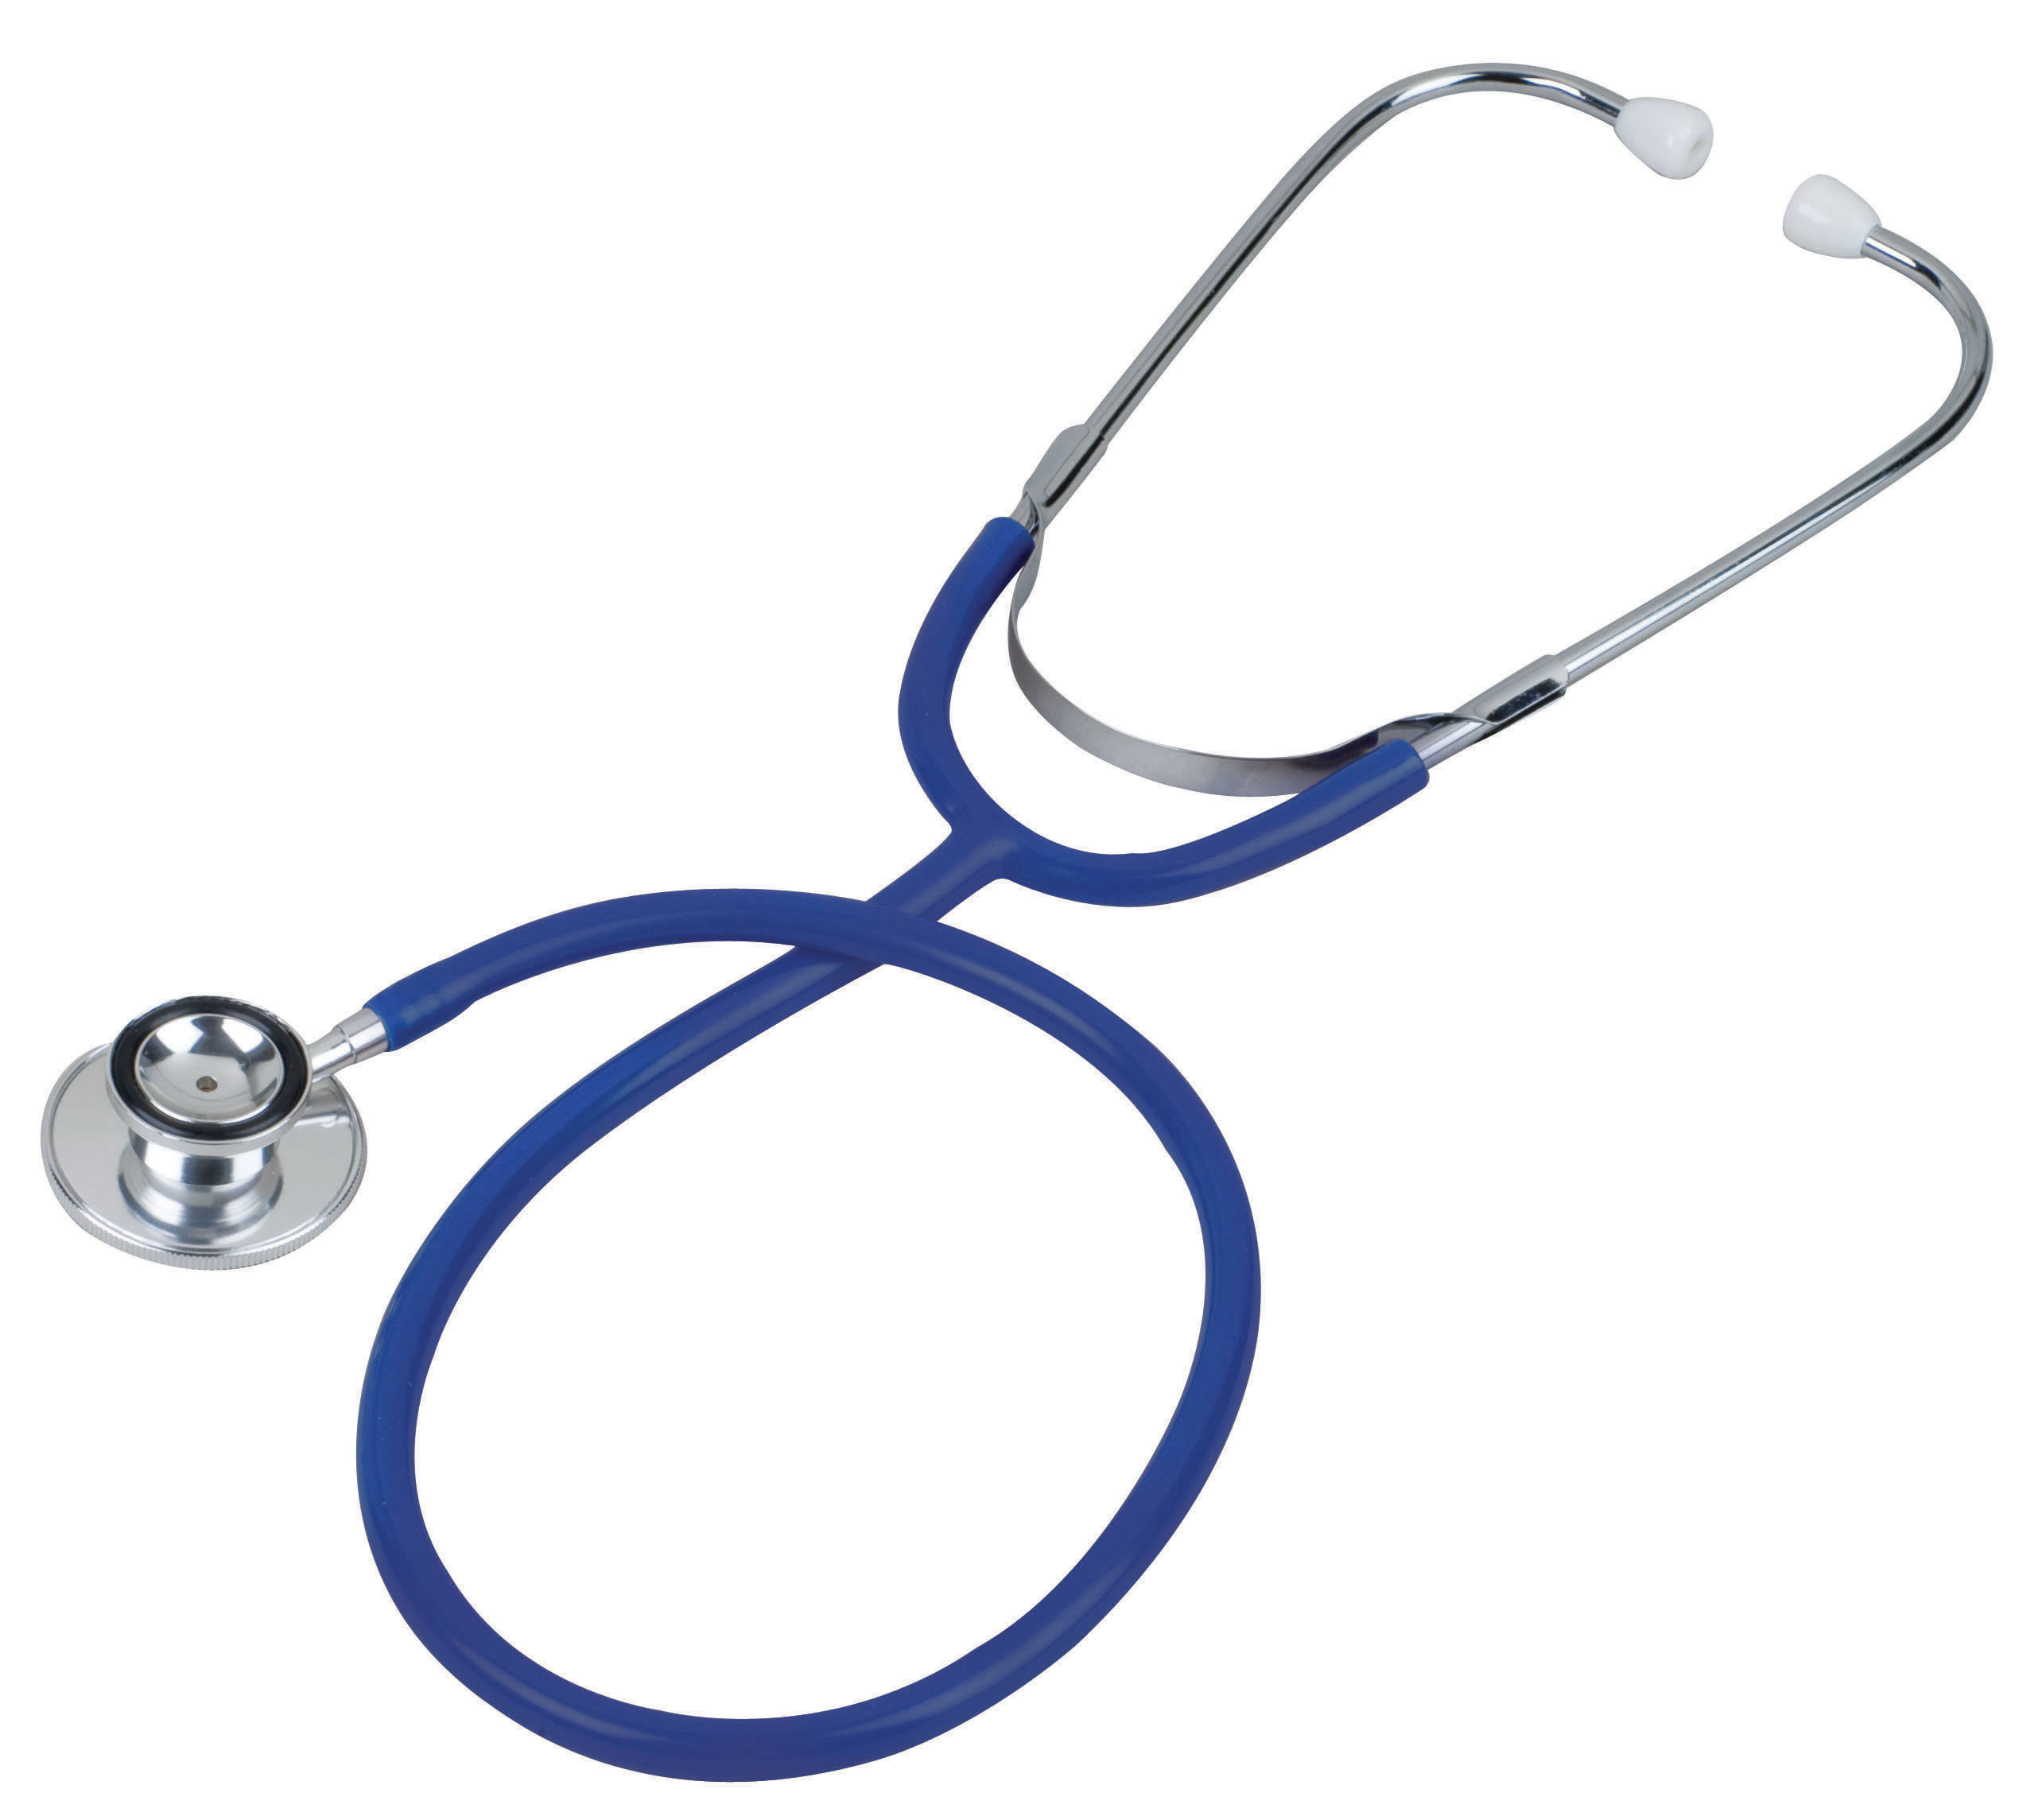 Image 50 of Stethoscope Pictures Free Clipart